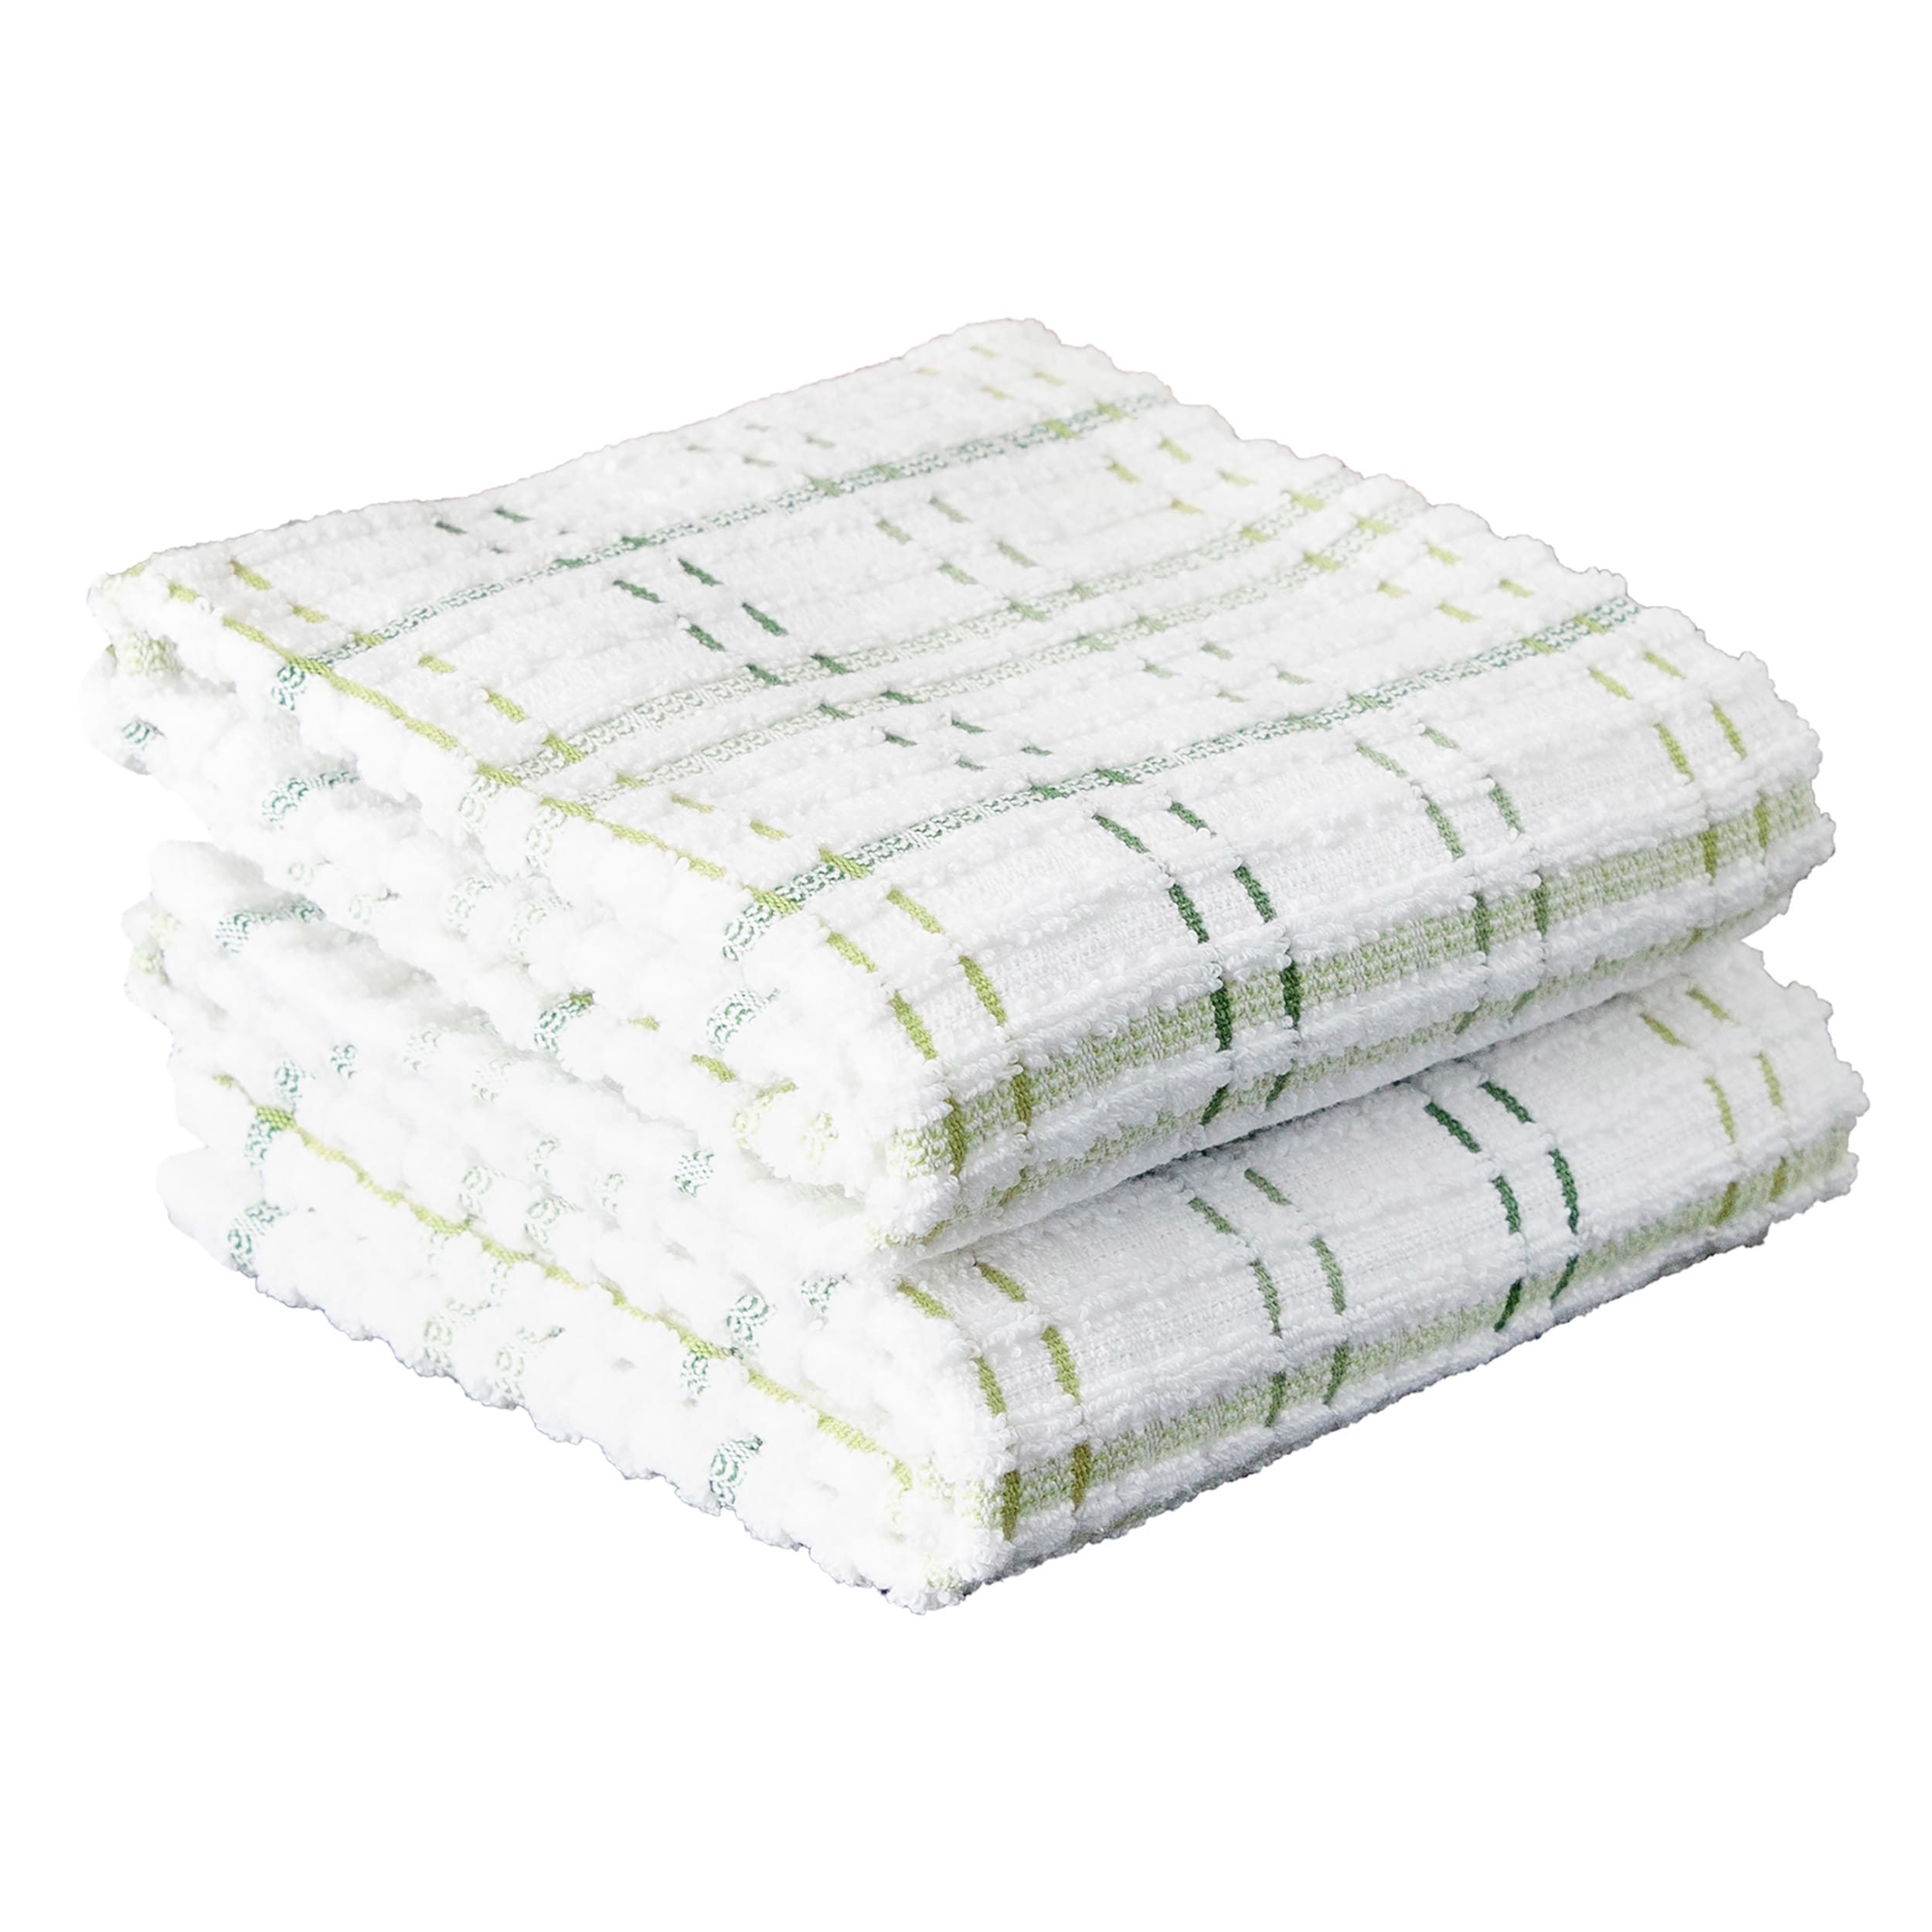 https://ak1.ostkcdn.com/images/products/is/images/direct/1c3134a87b560e5754e81e3808d06bf2bcba7ac7/Royale-Check-Cactus-Cotton-Kitchen-Towels-%28Set-of-2%29.jpg